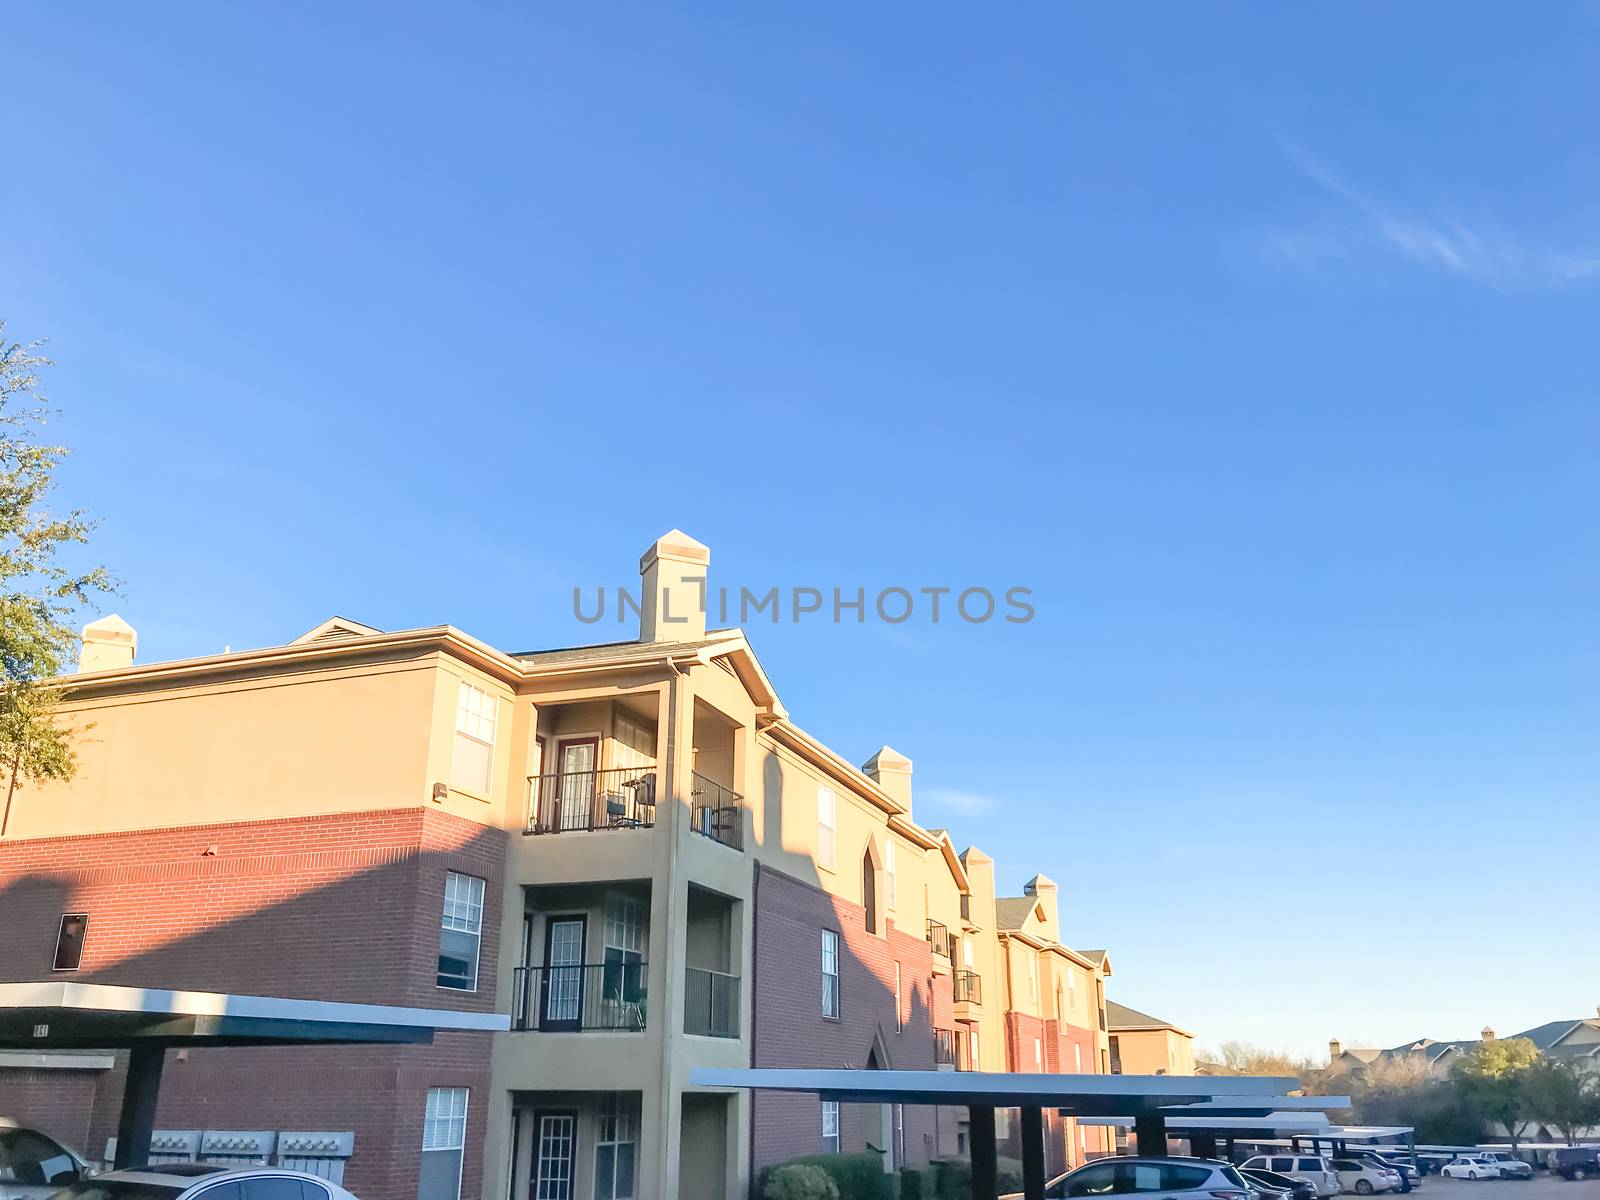 Apartment building complex and parked cars in Lewisville, Texas, USA. Low angle view of multi-stories rental real estate with covered parking at sunset with cloud sky